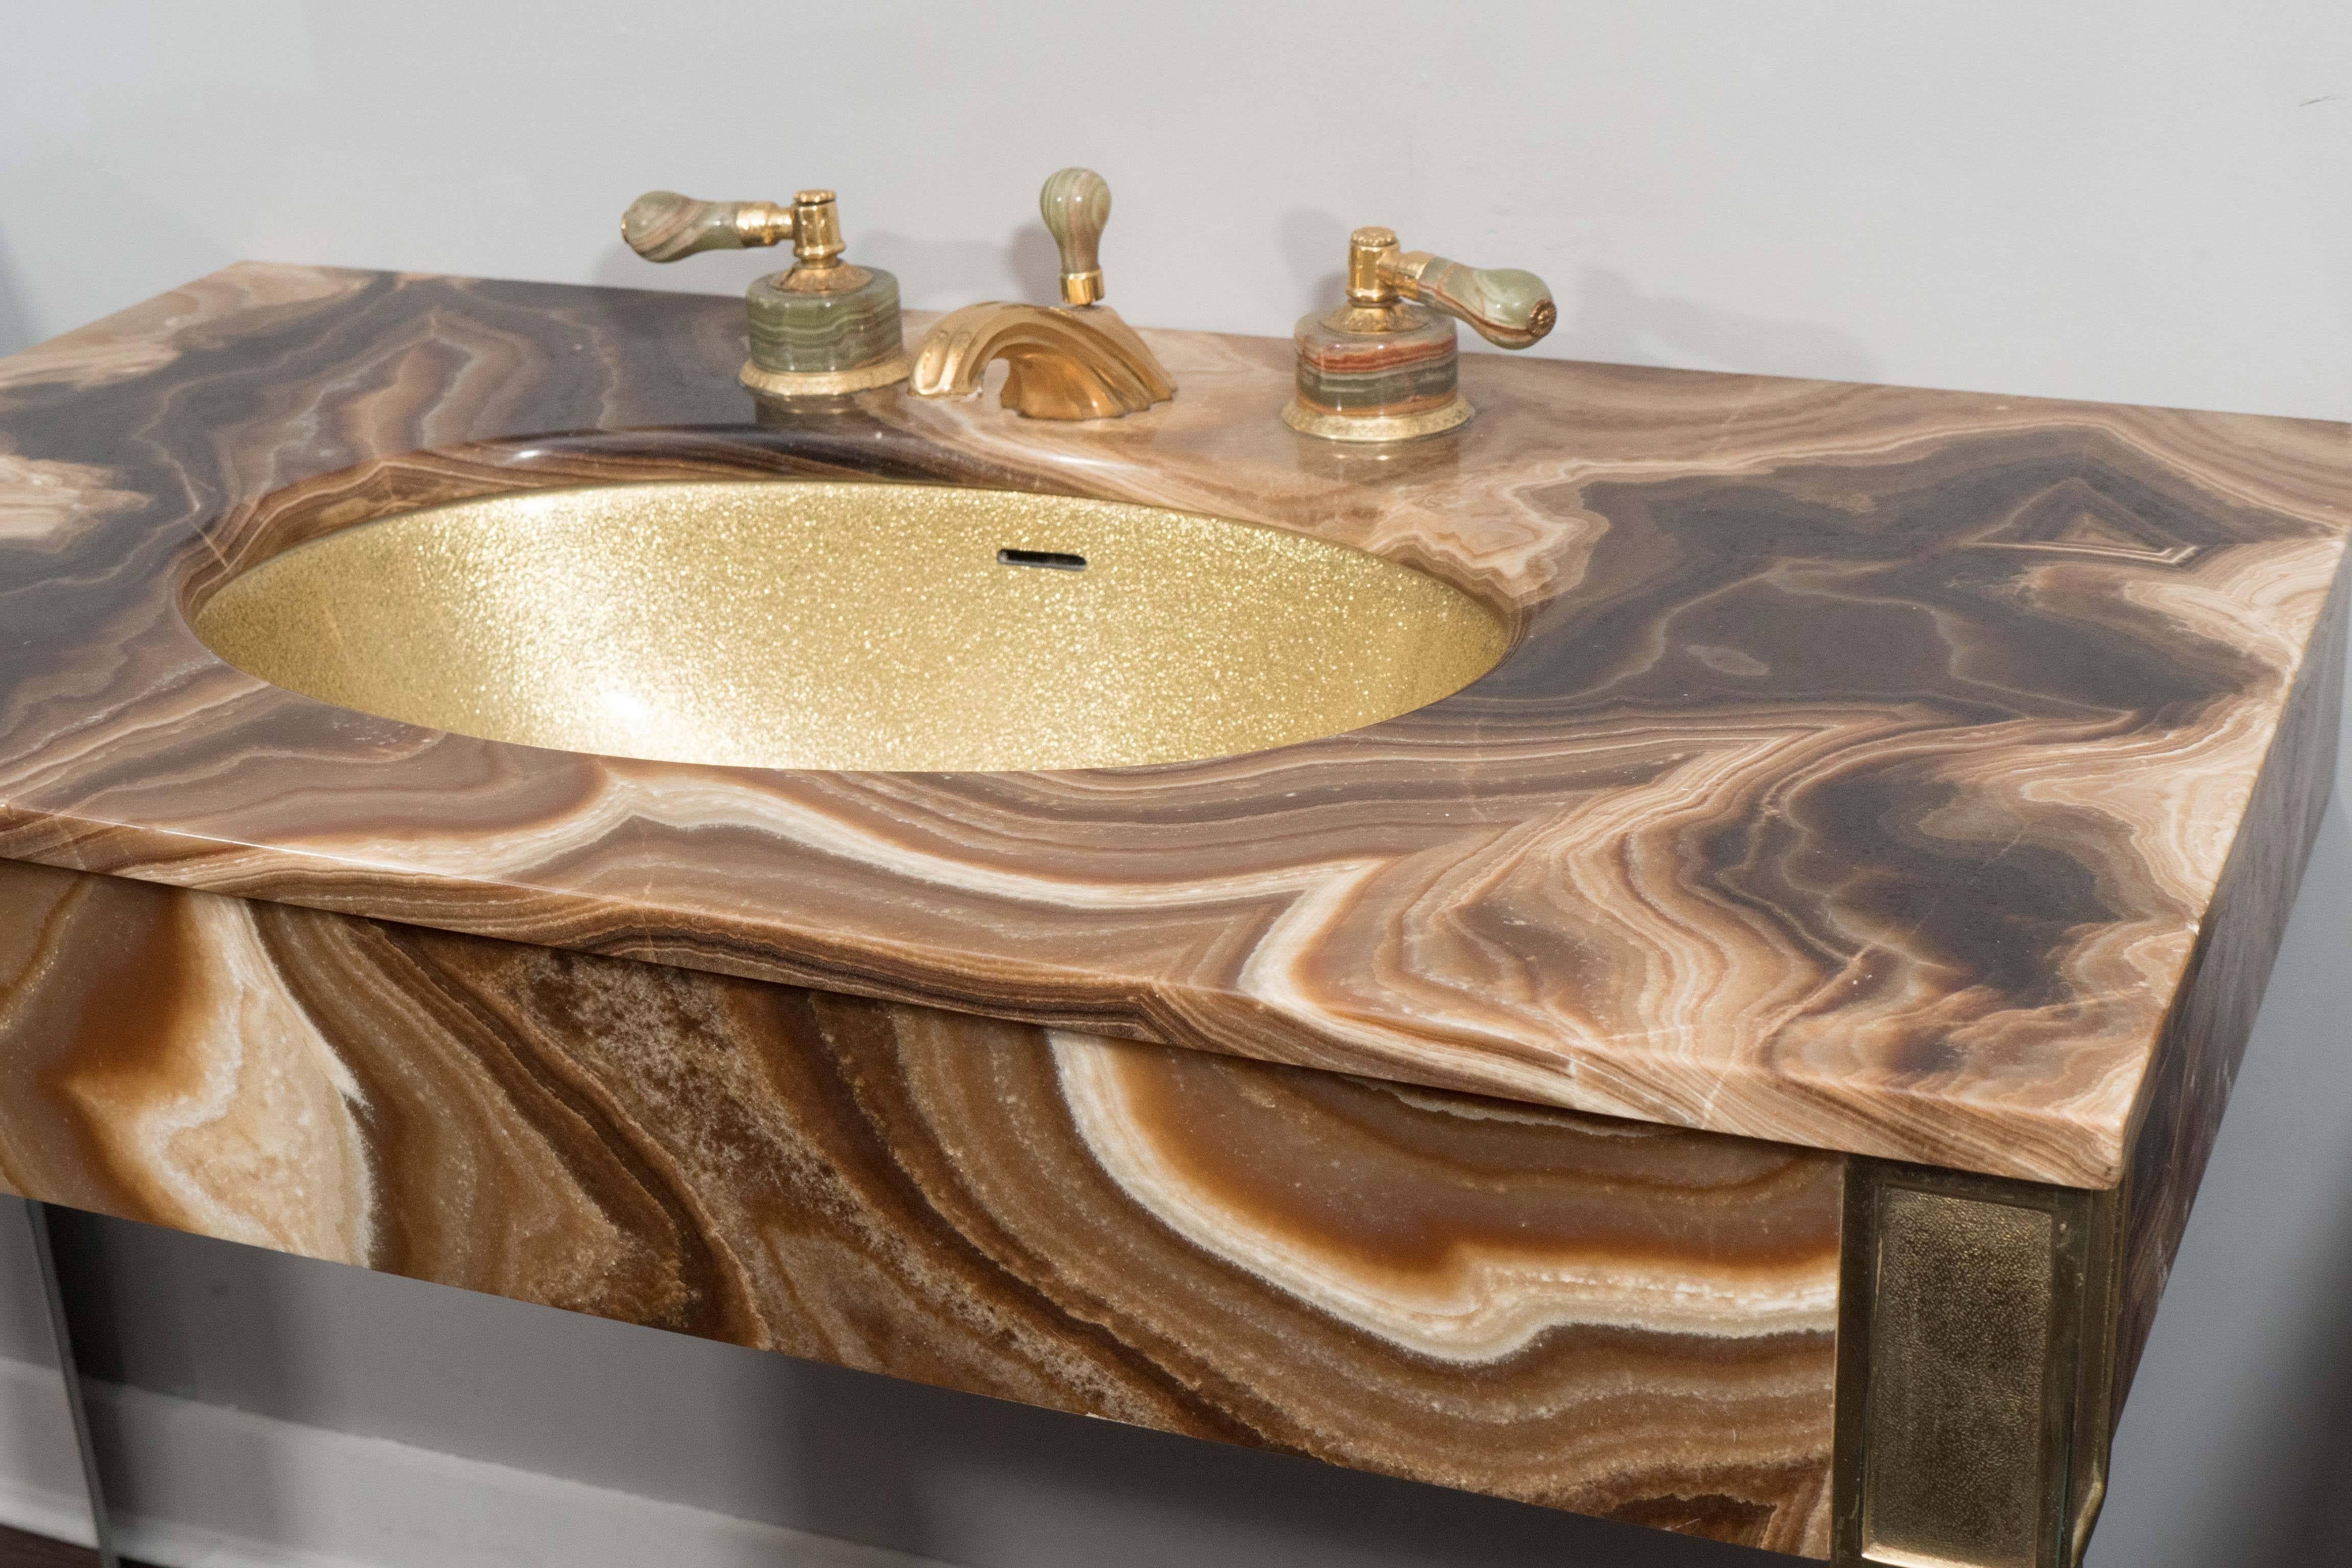 Late 20th Century Sienna Marble Vintage Bathroom Vanity with Gold Glitter Sink by Sherle Wagner